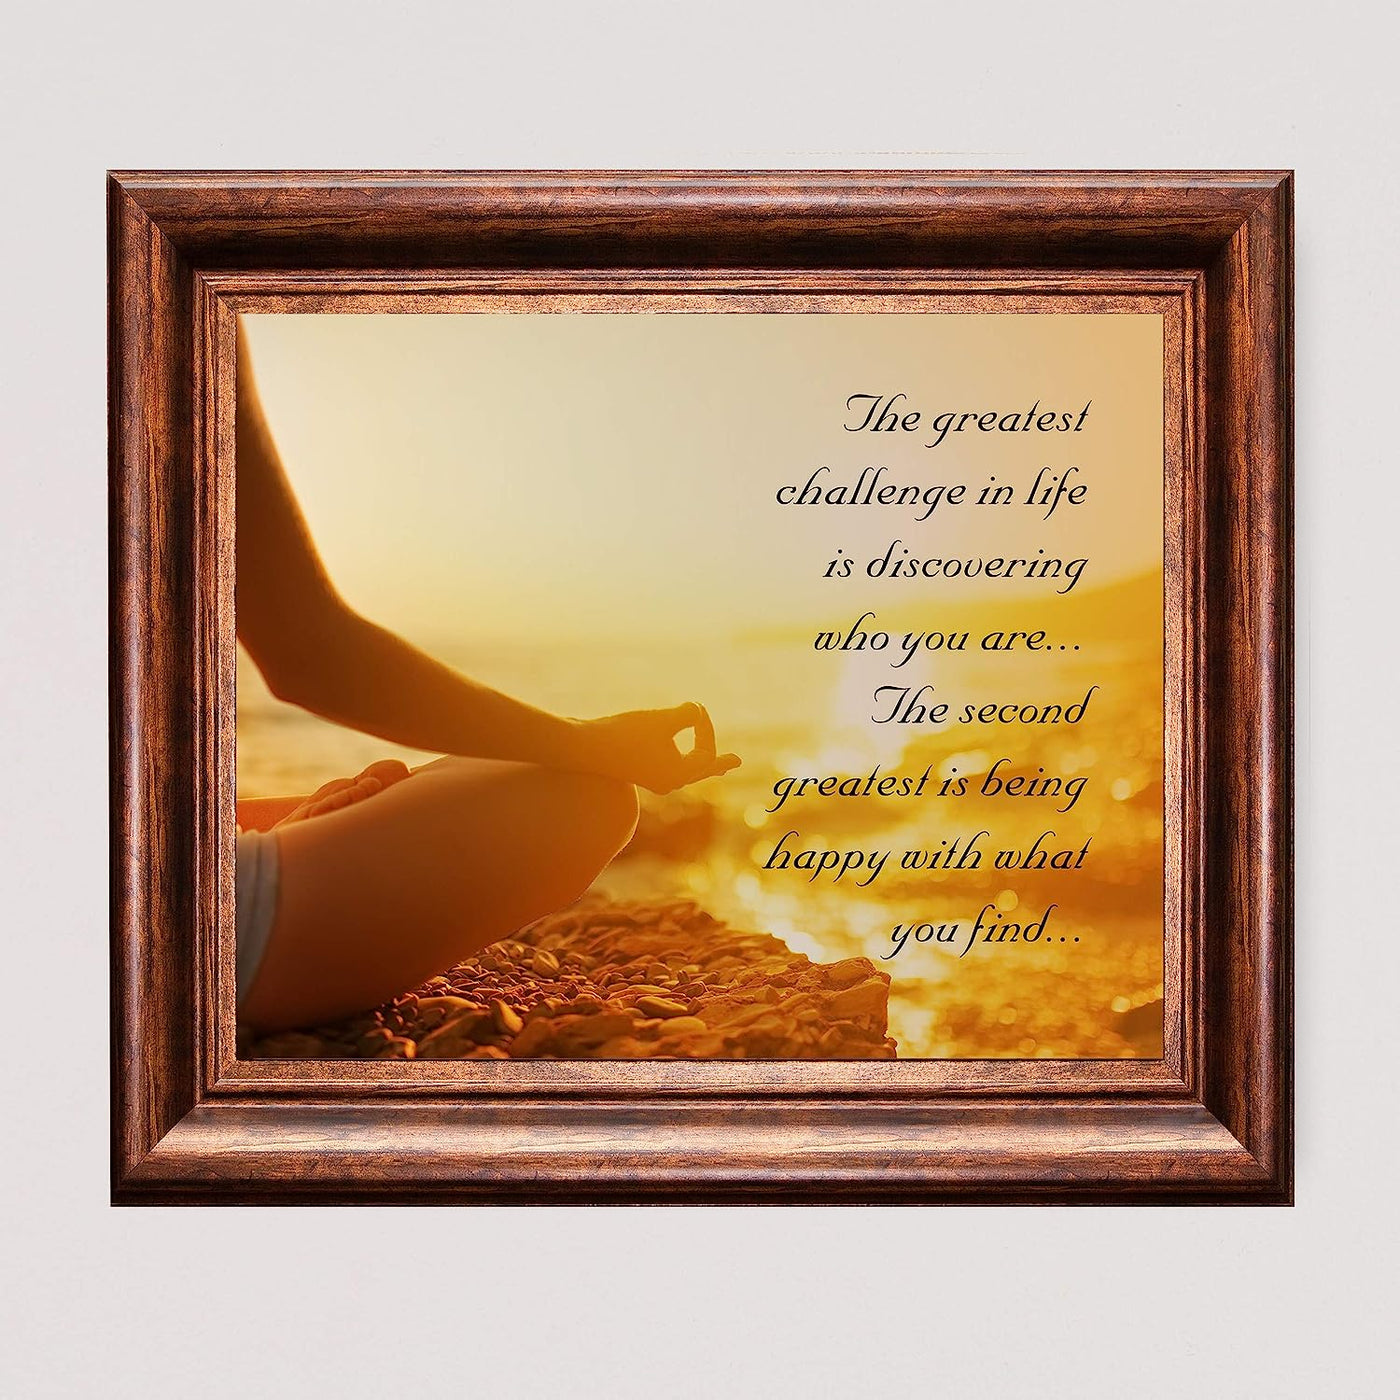 Greatest Challenge-Discover Who You Are-Happy With What You Find- Inspirational Wall Art-10 x 8"- Wall Print-Ready to Frame. Modern Zen Decor for Home-Office-Studio-Meditation-Yoga. Great Gift!